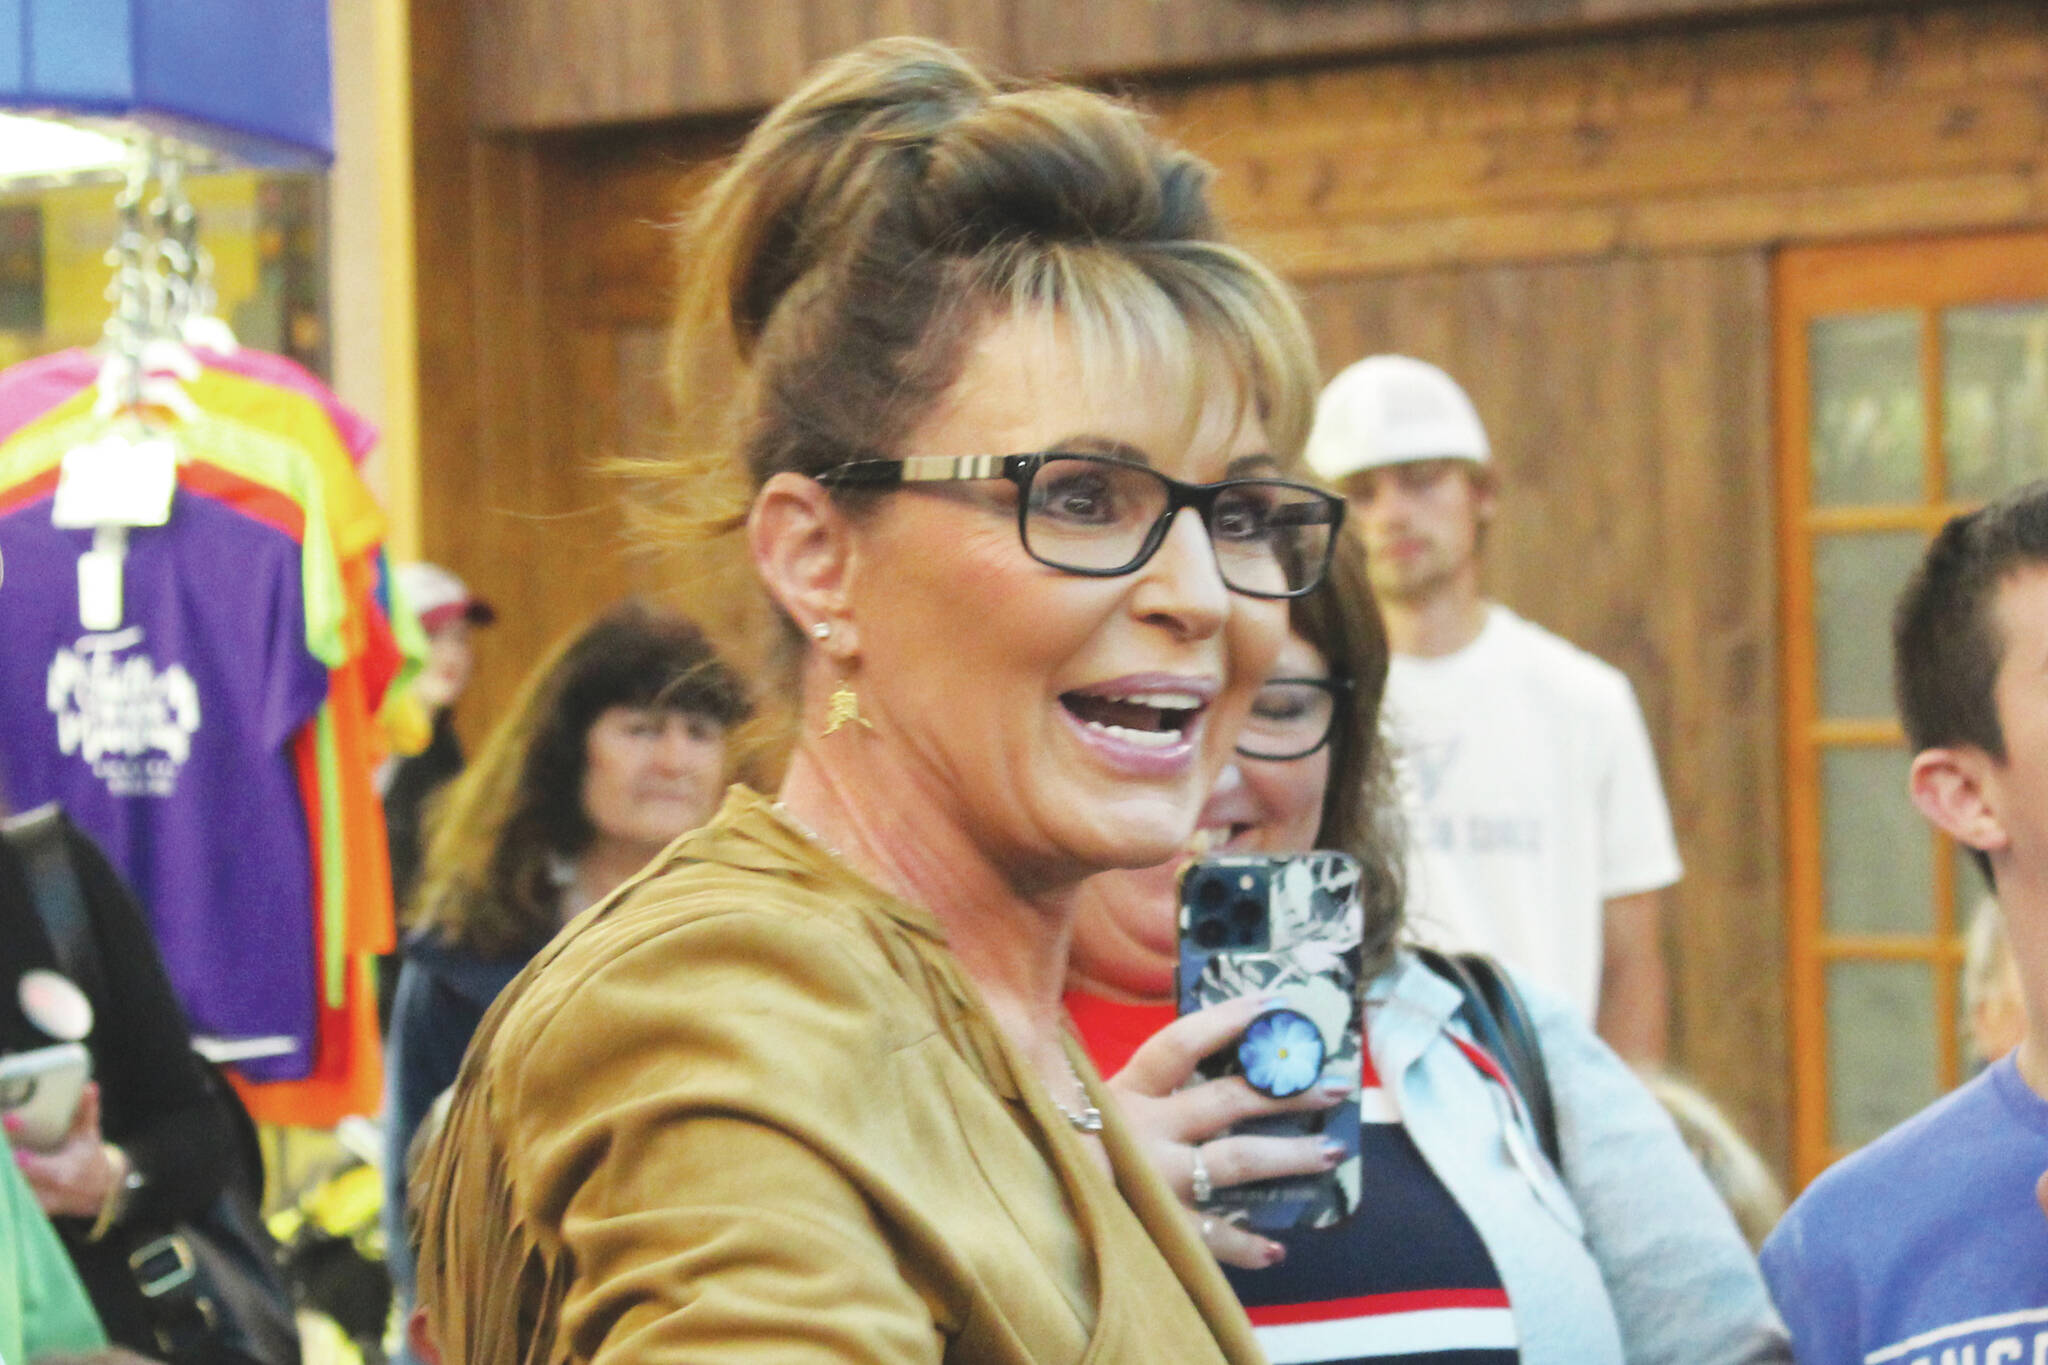 Former Alaska Governor and current Congressional hopeful Sarah Palin speaks with attendees at a meet and greet event outside of Ginger’s Restaurant on Saturday, May 14, 2022 in Soldotna, Alaska. (Ashlyn O’Hara/Peninsula Clarion)